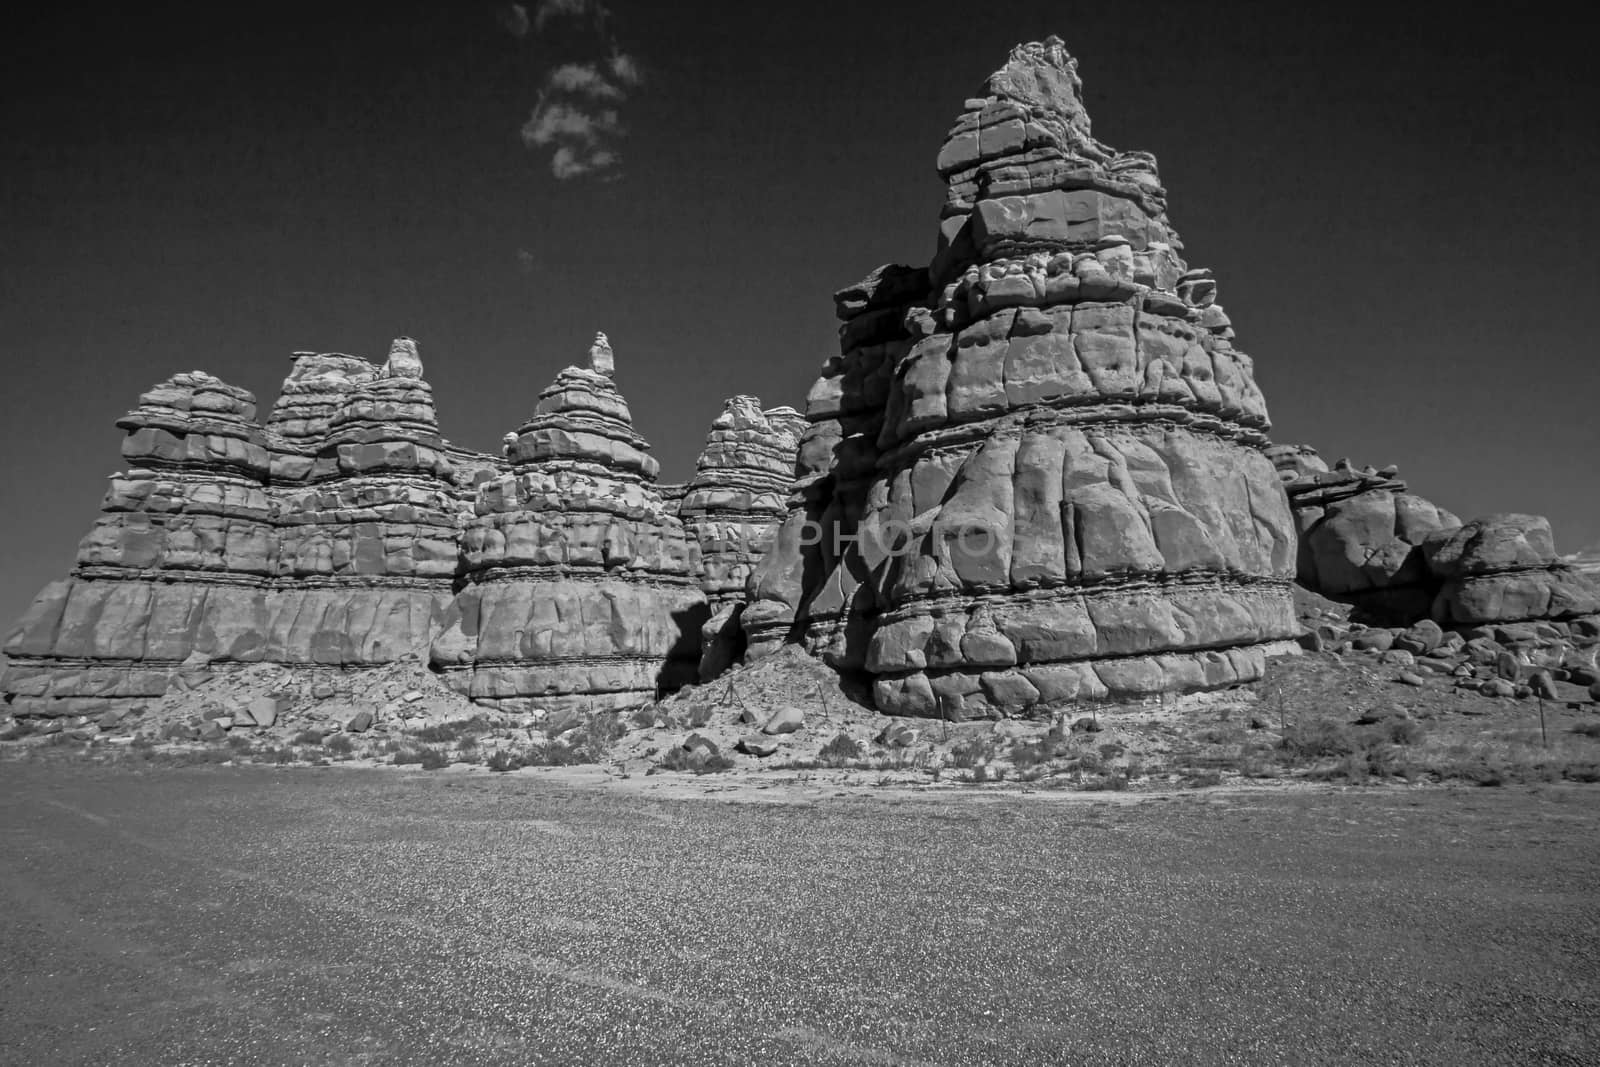 These strange, and unnamed  sandstone formations occur over a wide area between the San Rafael Swell and route 24 in Utah, USA.